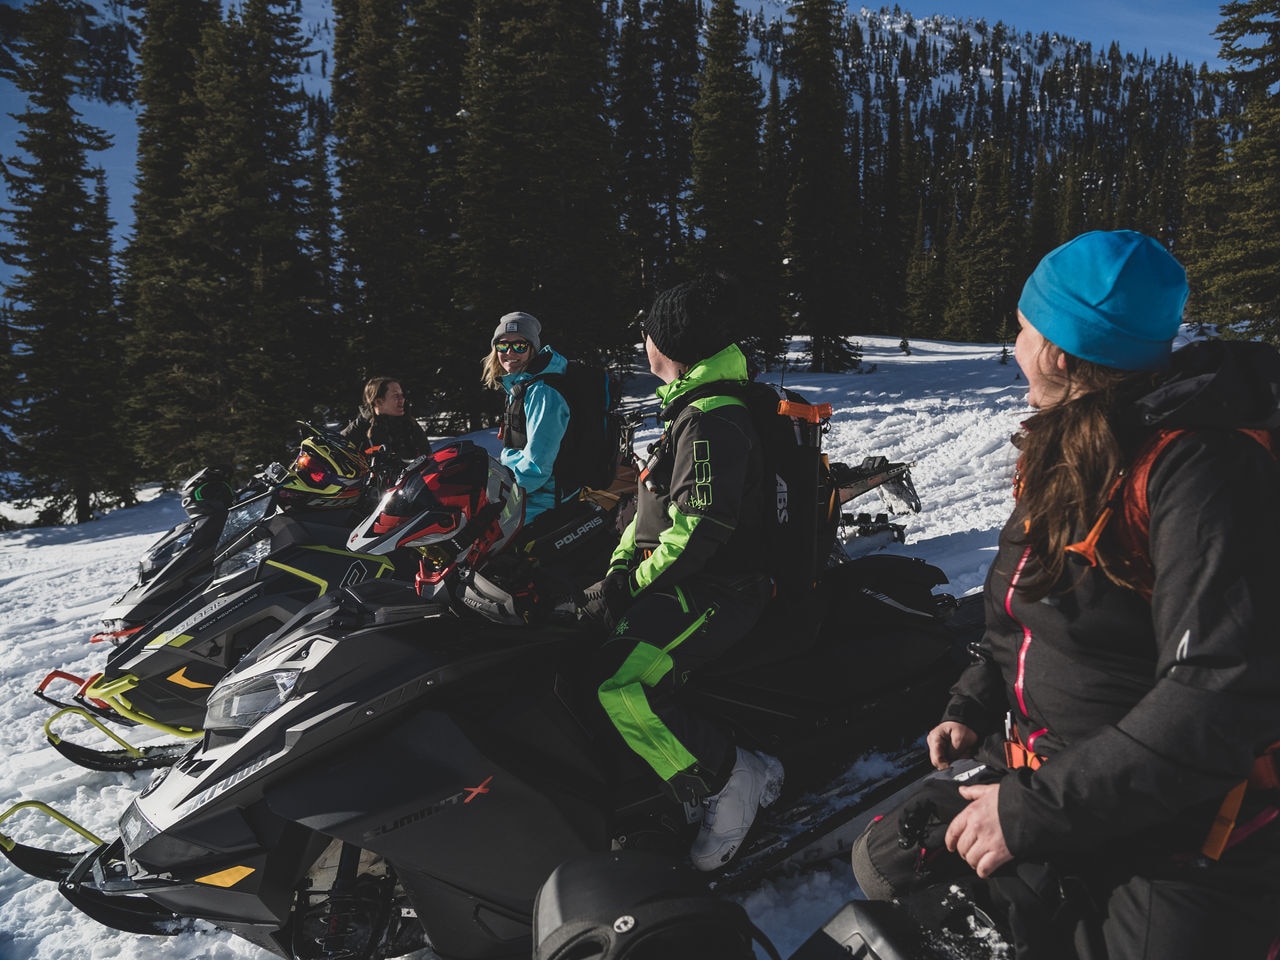 It's your turn to join the annual Ladies Ride in Sicamous, BC